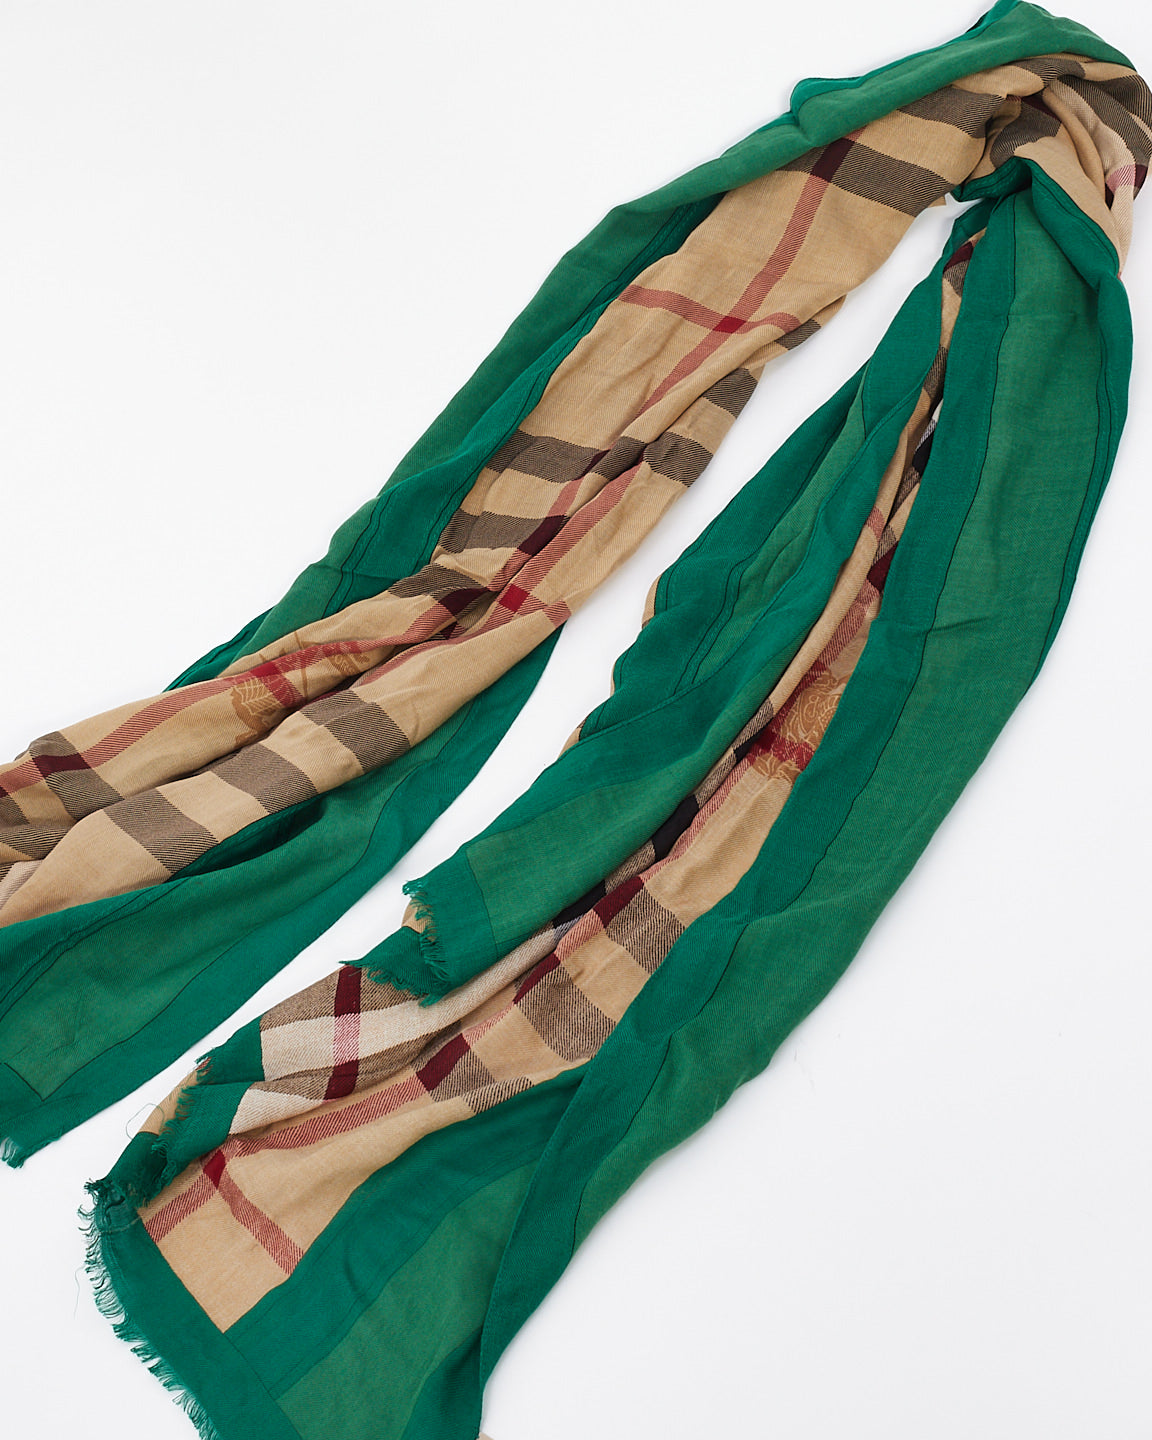 Burberry Beige & Green Check Print Cotton Scarf